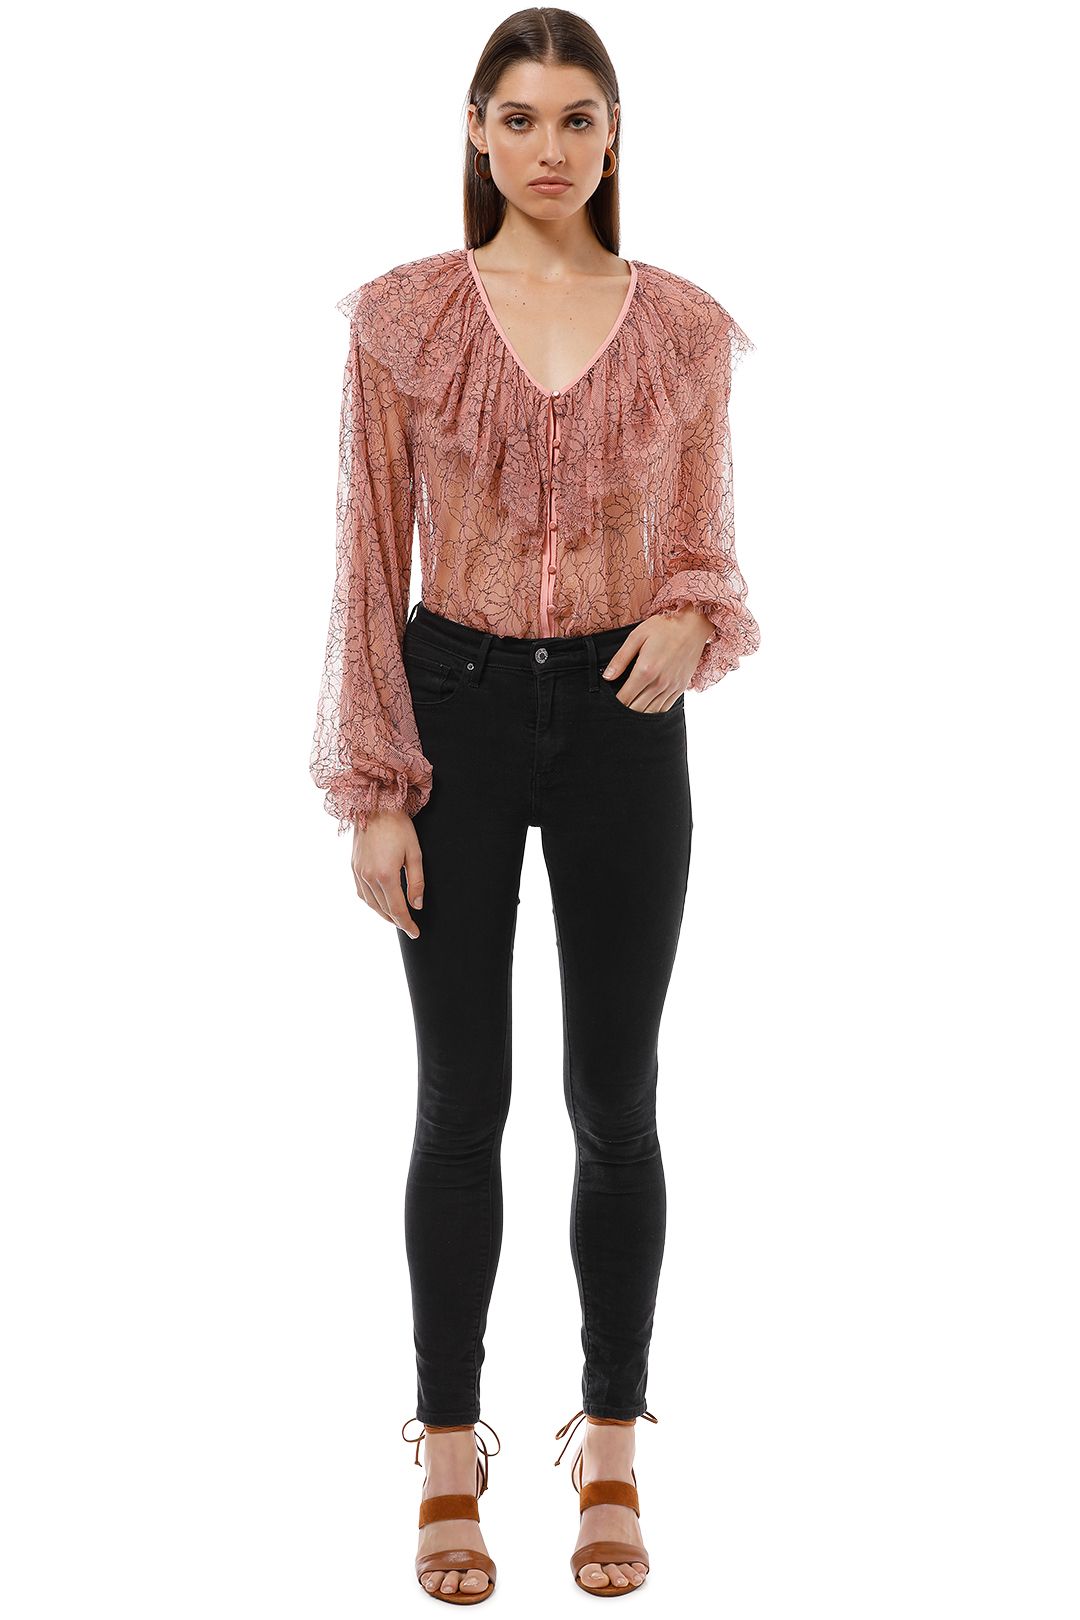 Alice McCall - Folklore Blouse - Blush Pink - Front